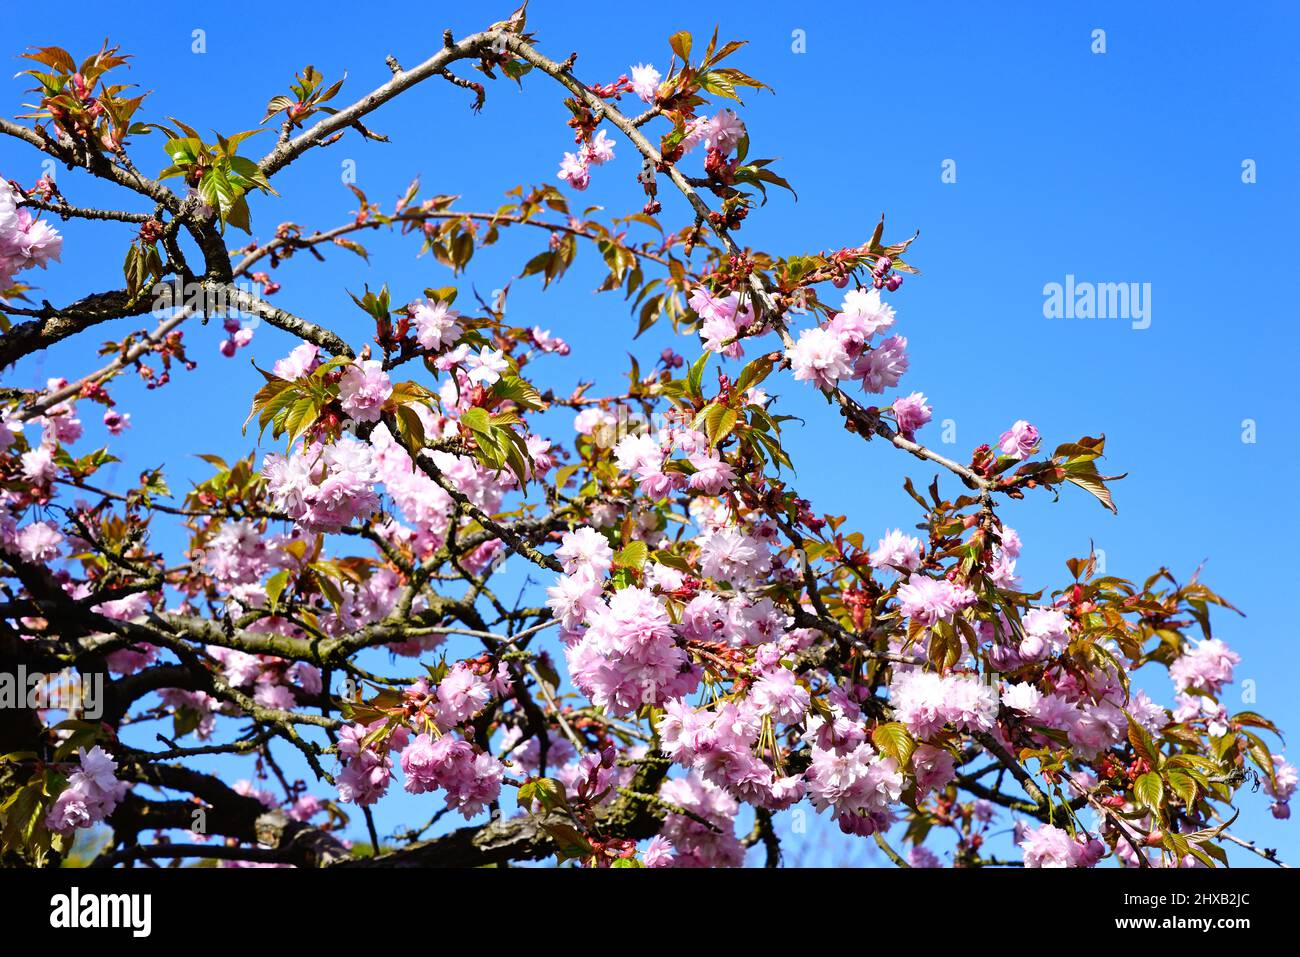 Pretty pink cherry blossom tree in bloom against a blue sky, Staffordshire, England, UK, Europe. Stock Photo